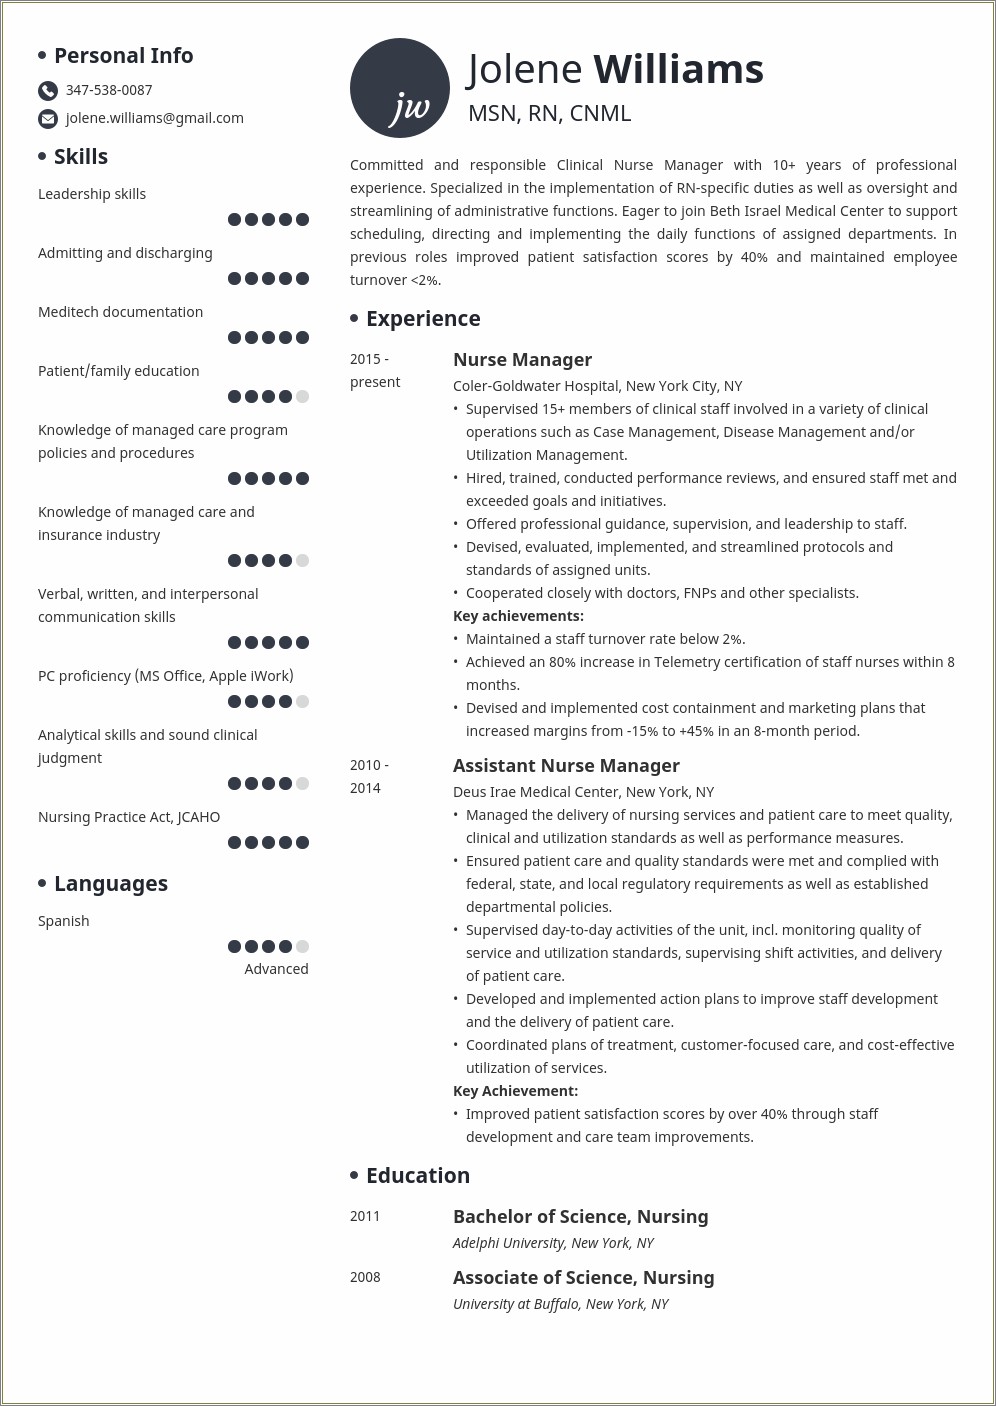 Objective For A Nurse Manager Resume